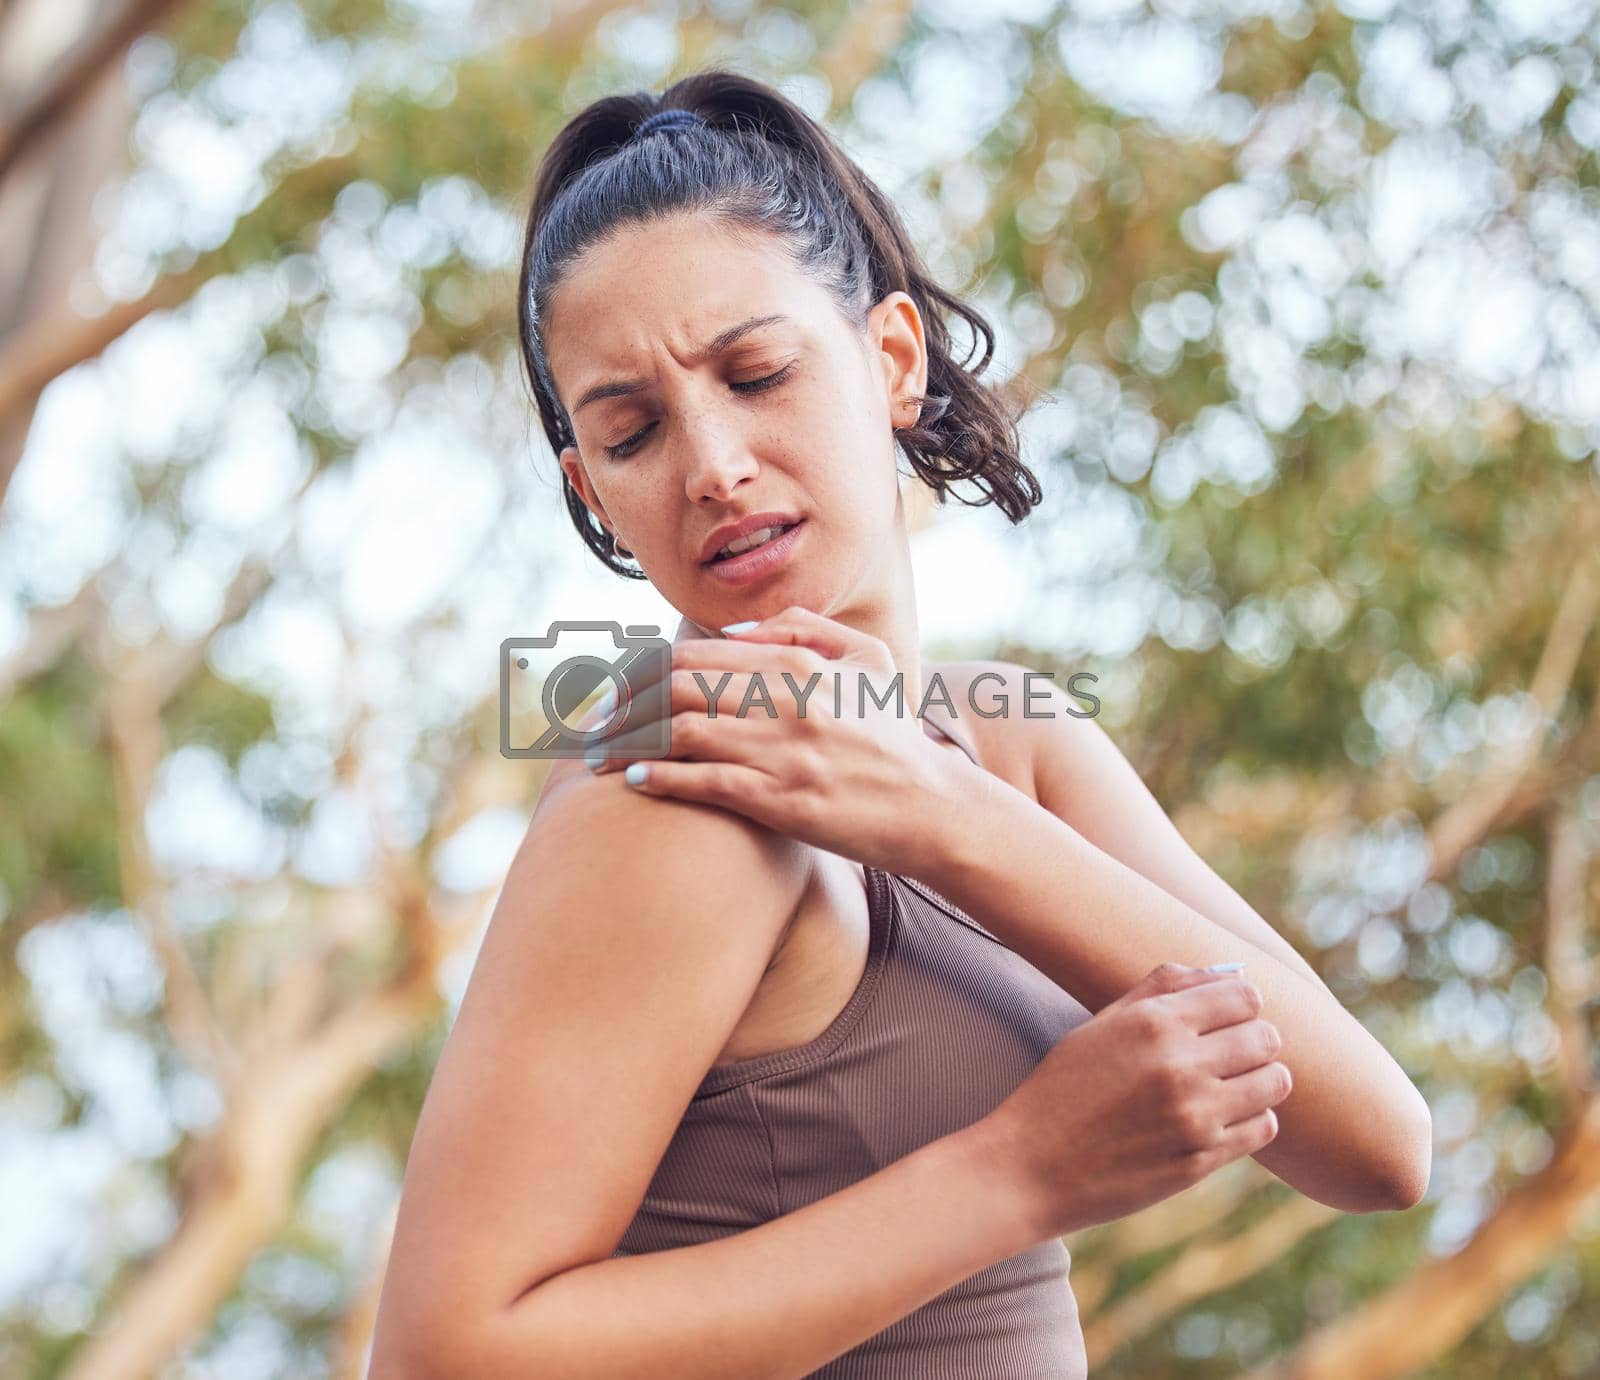 Royalty free image of This muscle suddenly pulled stiff. a young woman experiencing shoulder pain while exercising outdoors. by YuriArcurs